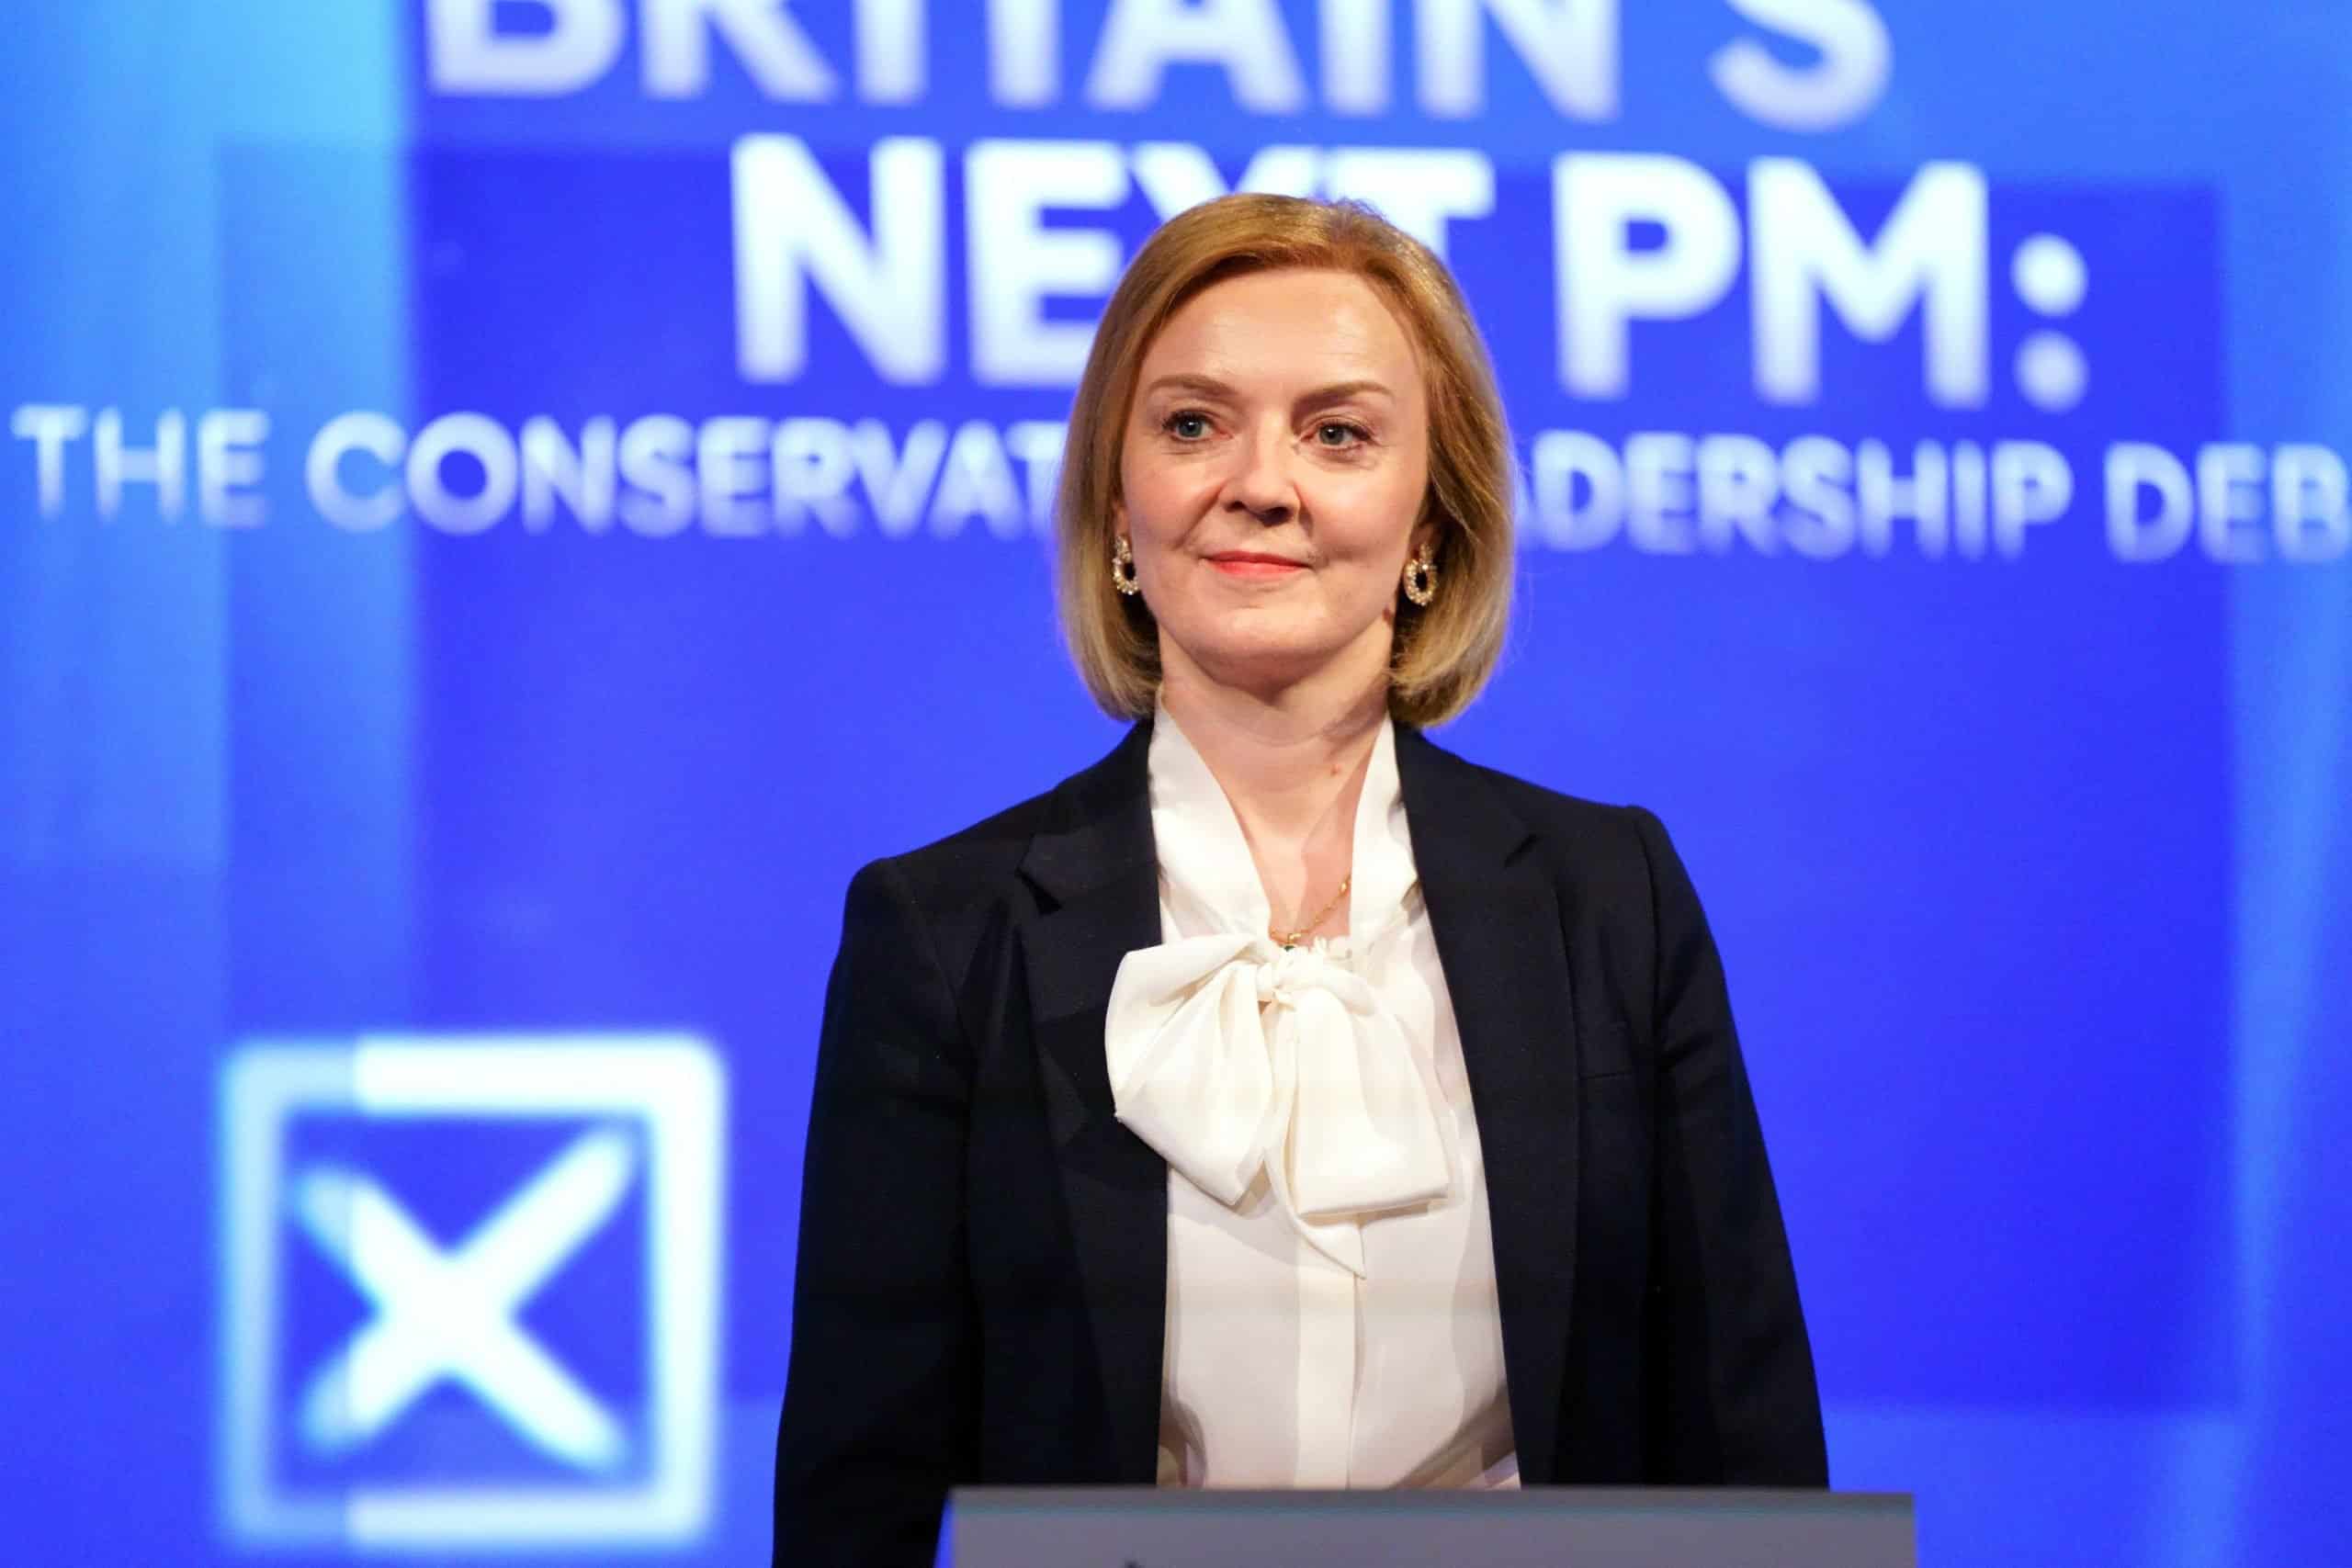 Liz Truss’ first tweet as she goes head-to-head with Sunak fell flat on her face